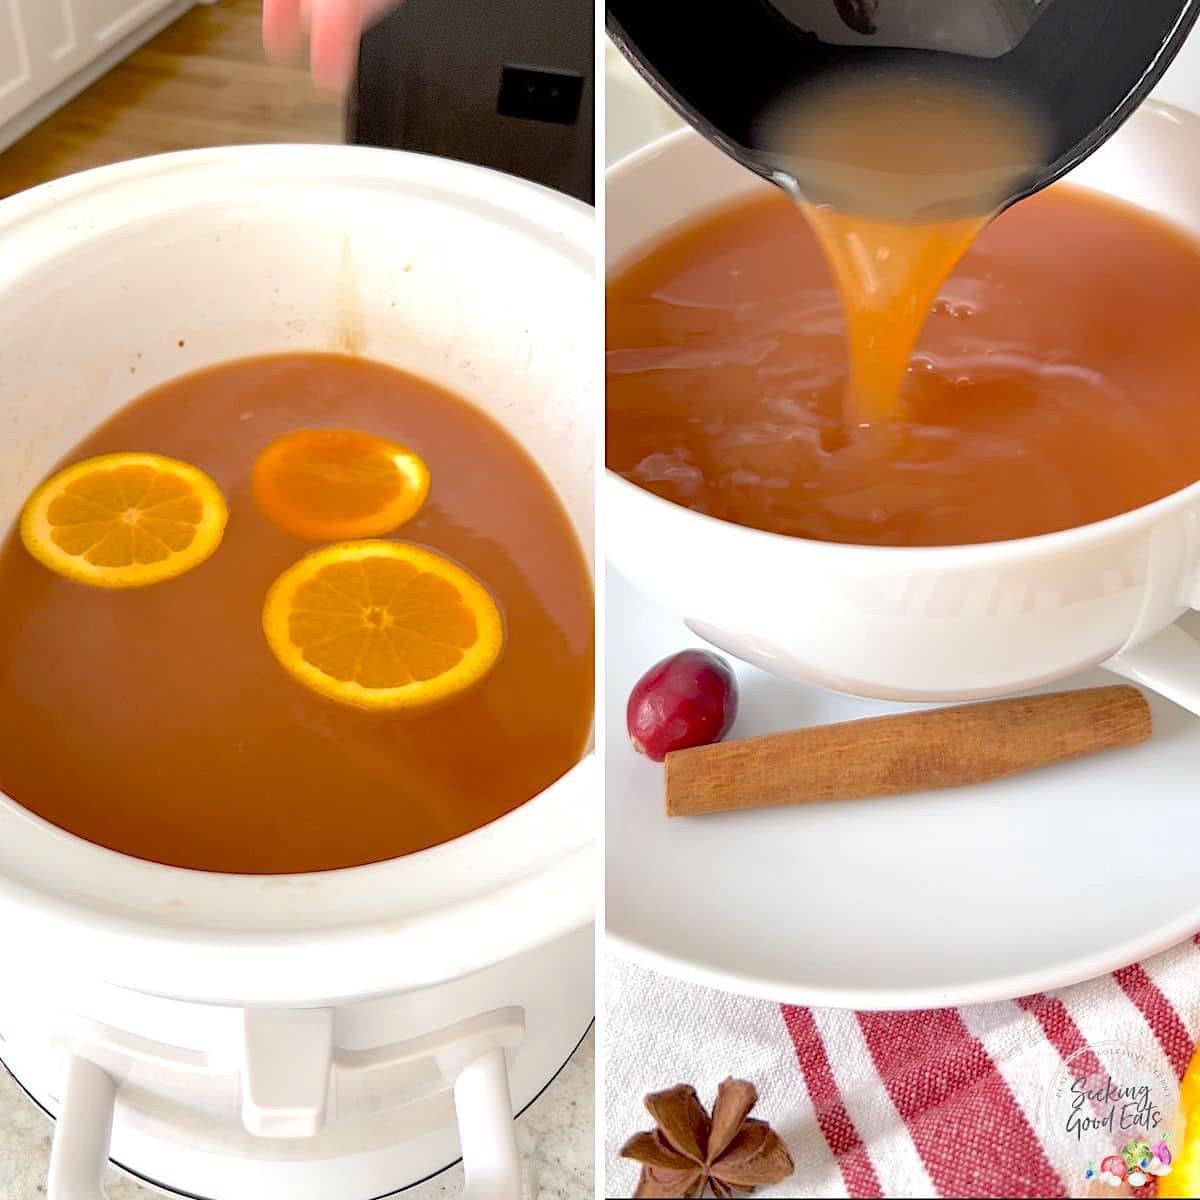 Serving crockpot wassail out of a white slow cooker and into a white mug.